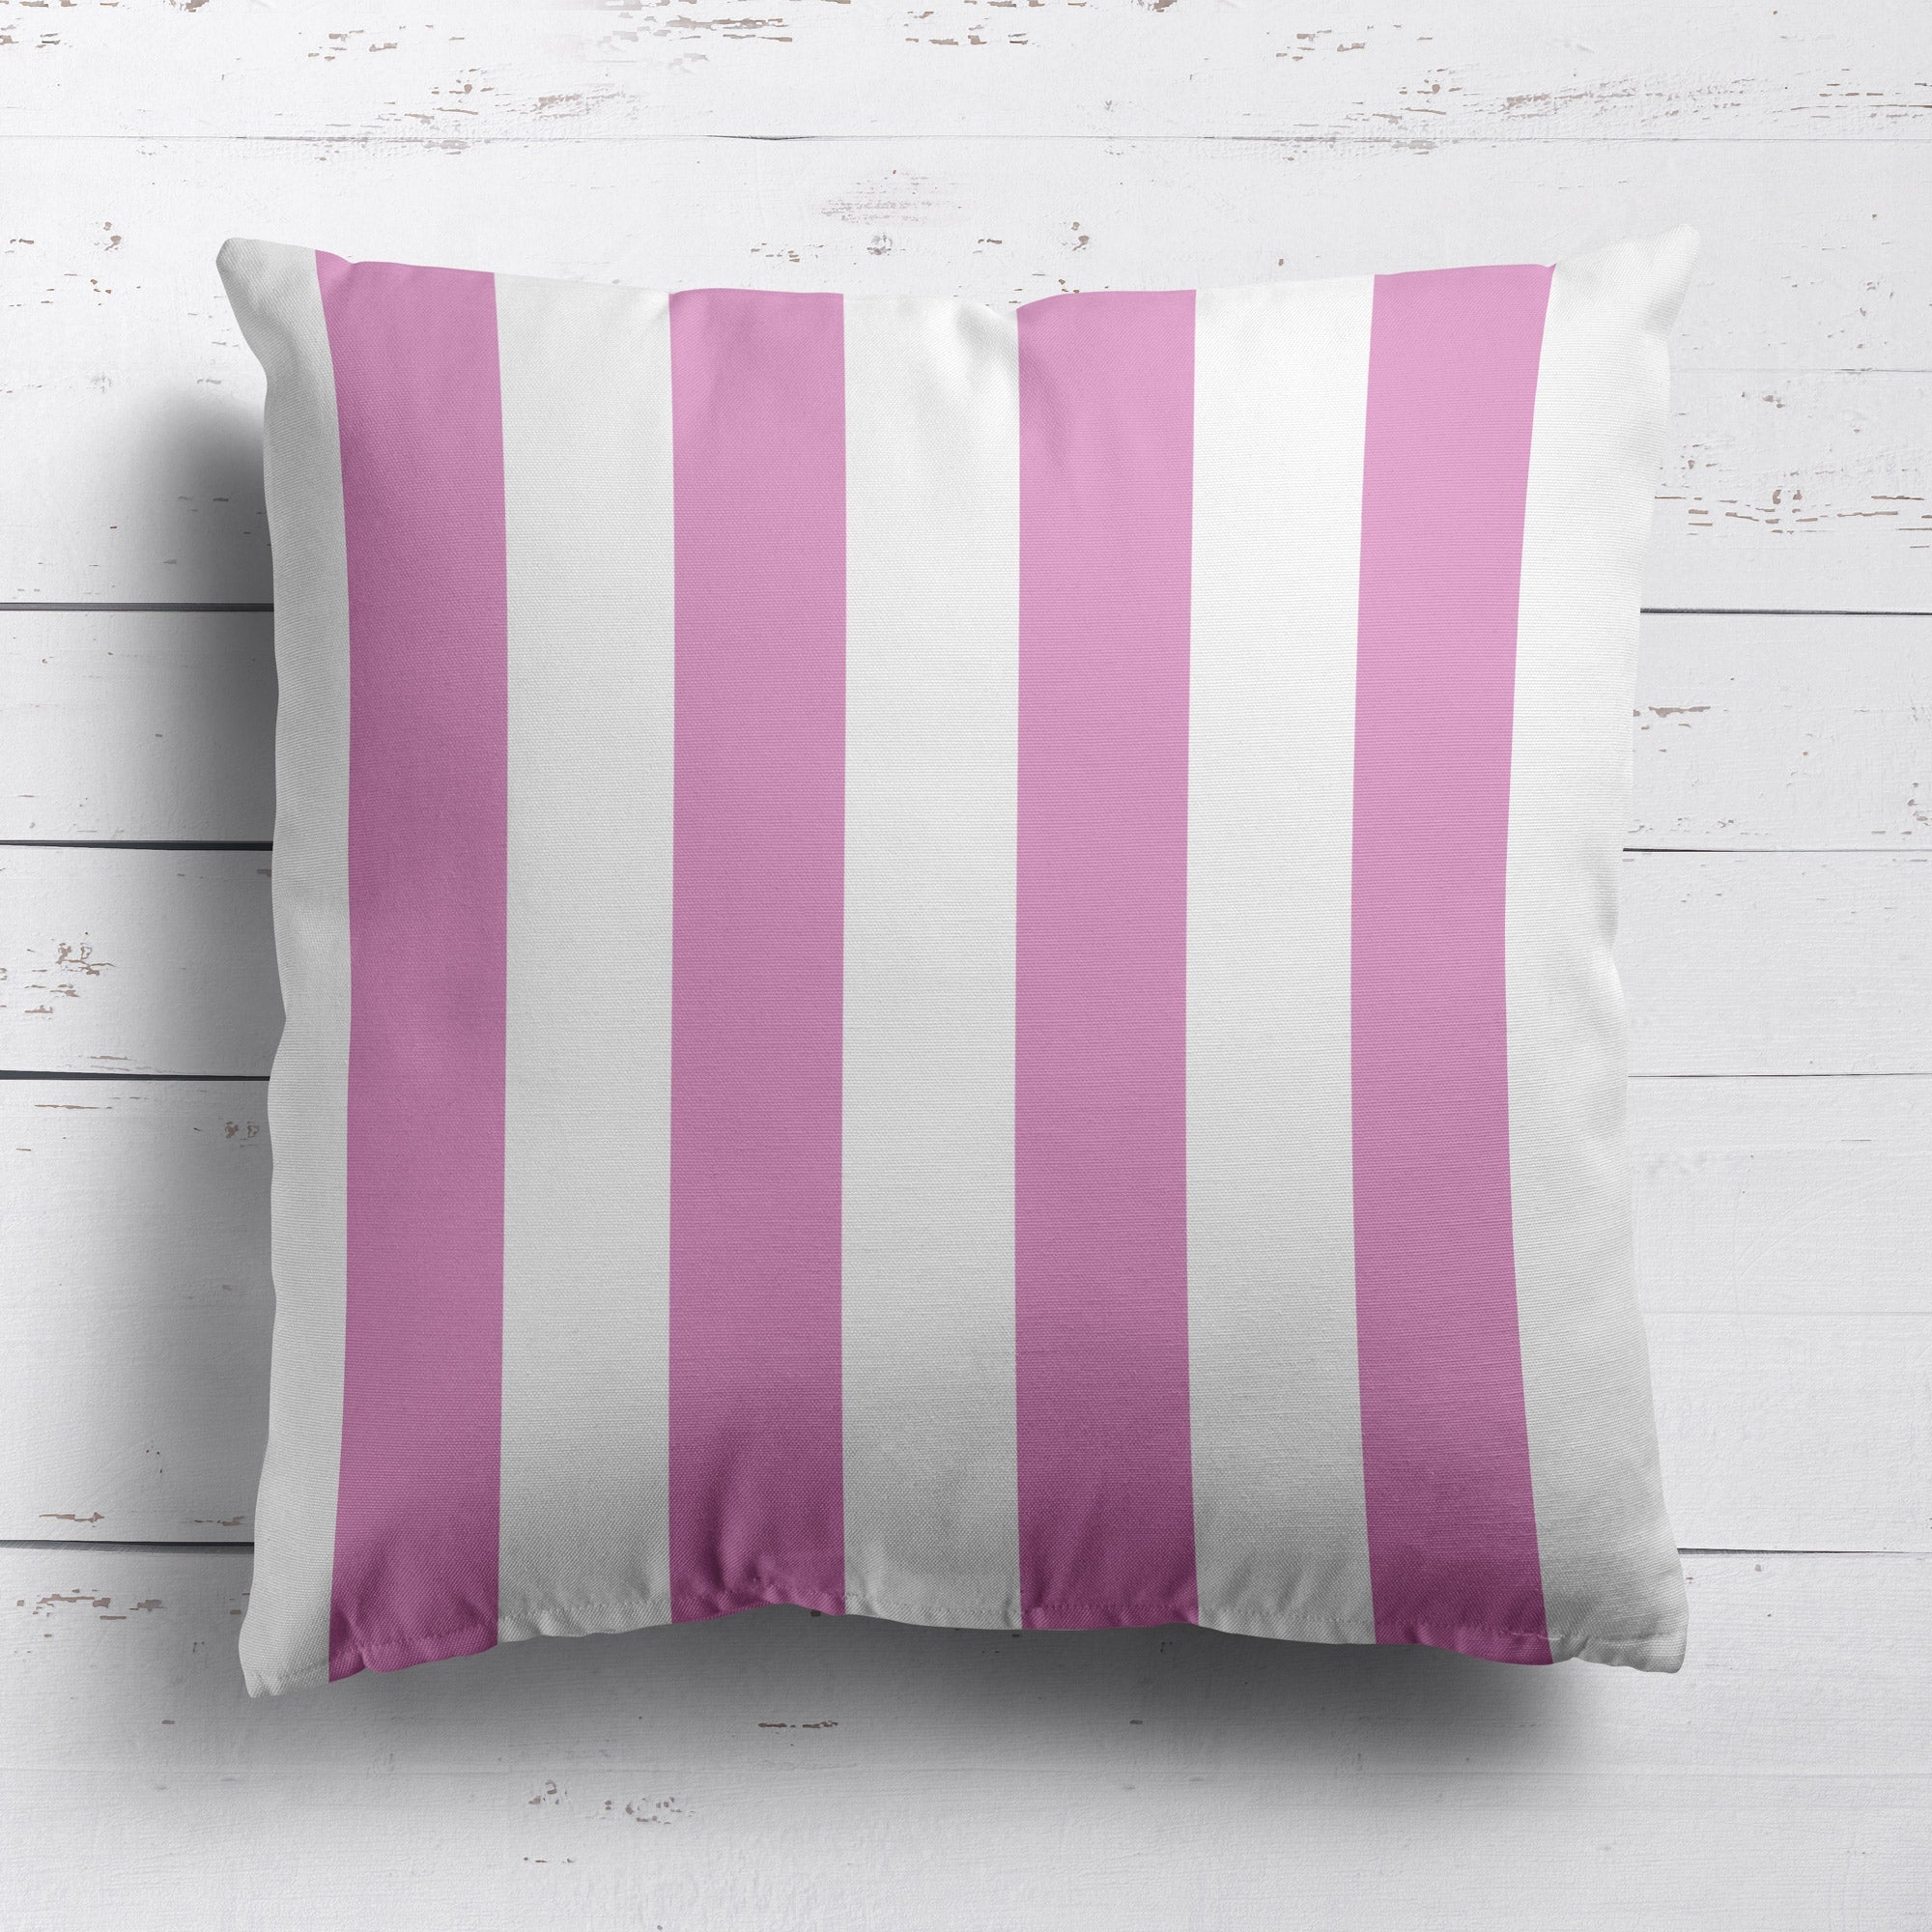 Awning Stripe Fabric - Tickled Pink - Hydrangea Lane Home